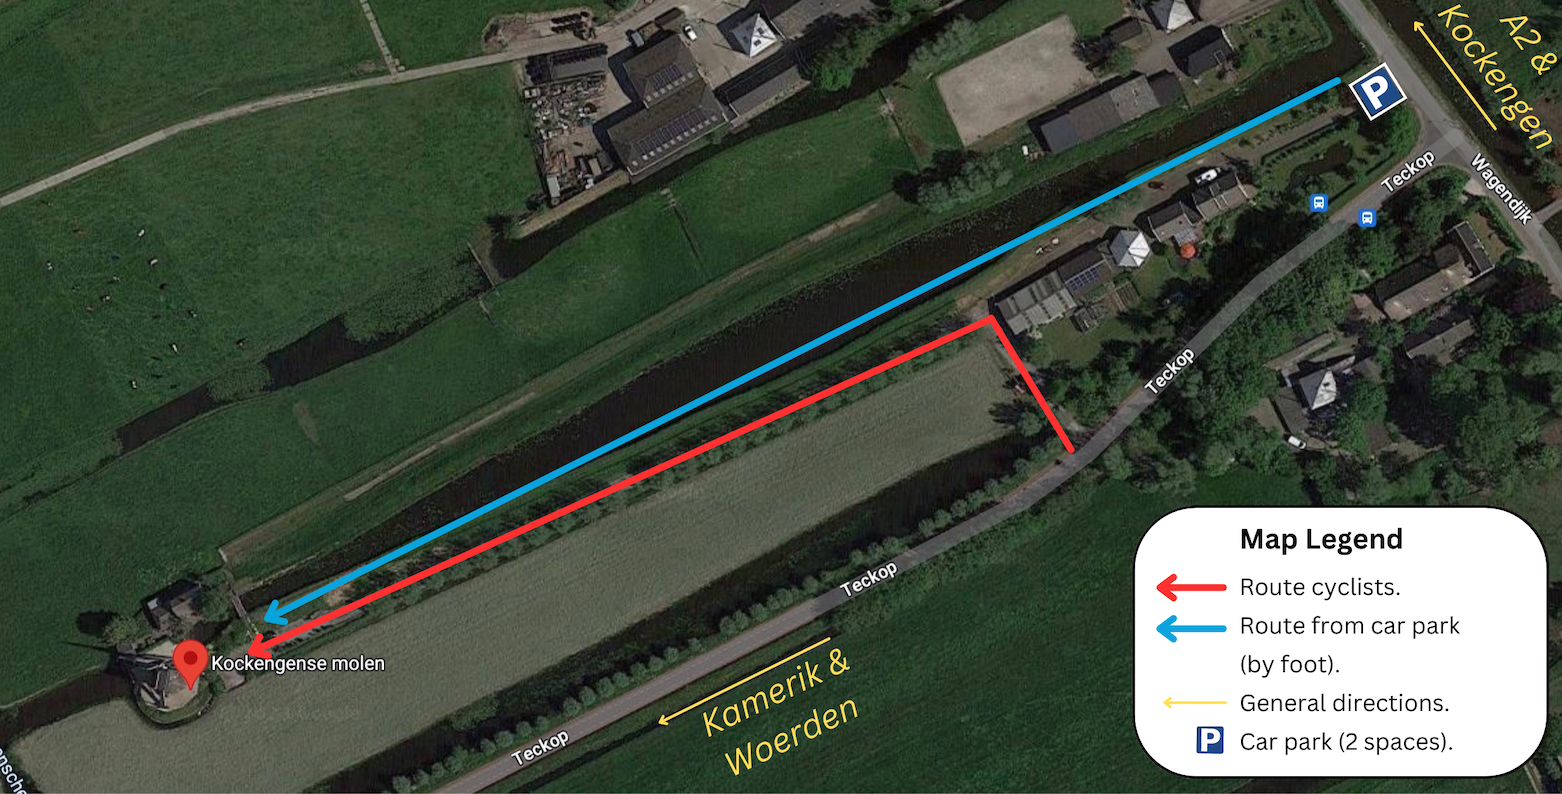 Screenshot of the location of the windmill on Google Maps. Several routes have been drawn in with arrows. A red arrow indicates the route for cyclists, the blue route indicates the route by foot (from the car park). There are also two yellow arrows which indicate general directions to nearby villages or the motorway. Lastly, there is a car park symbol added to the map. All is explained in a map legend in a white box with rounded corners